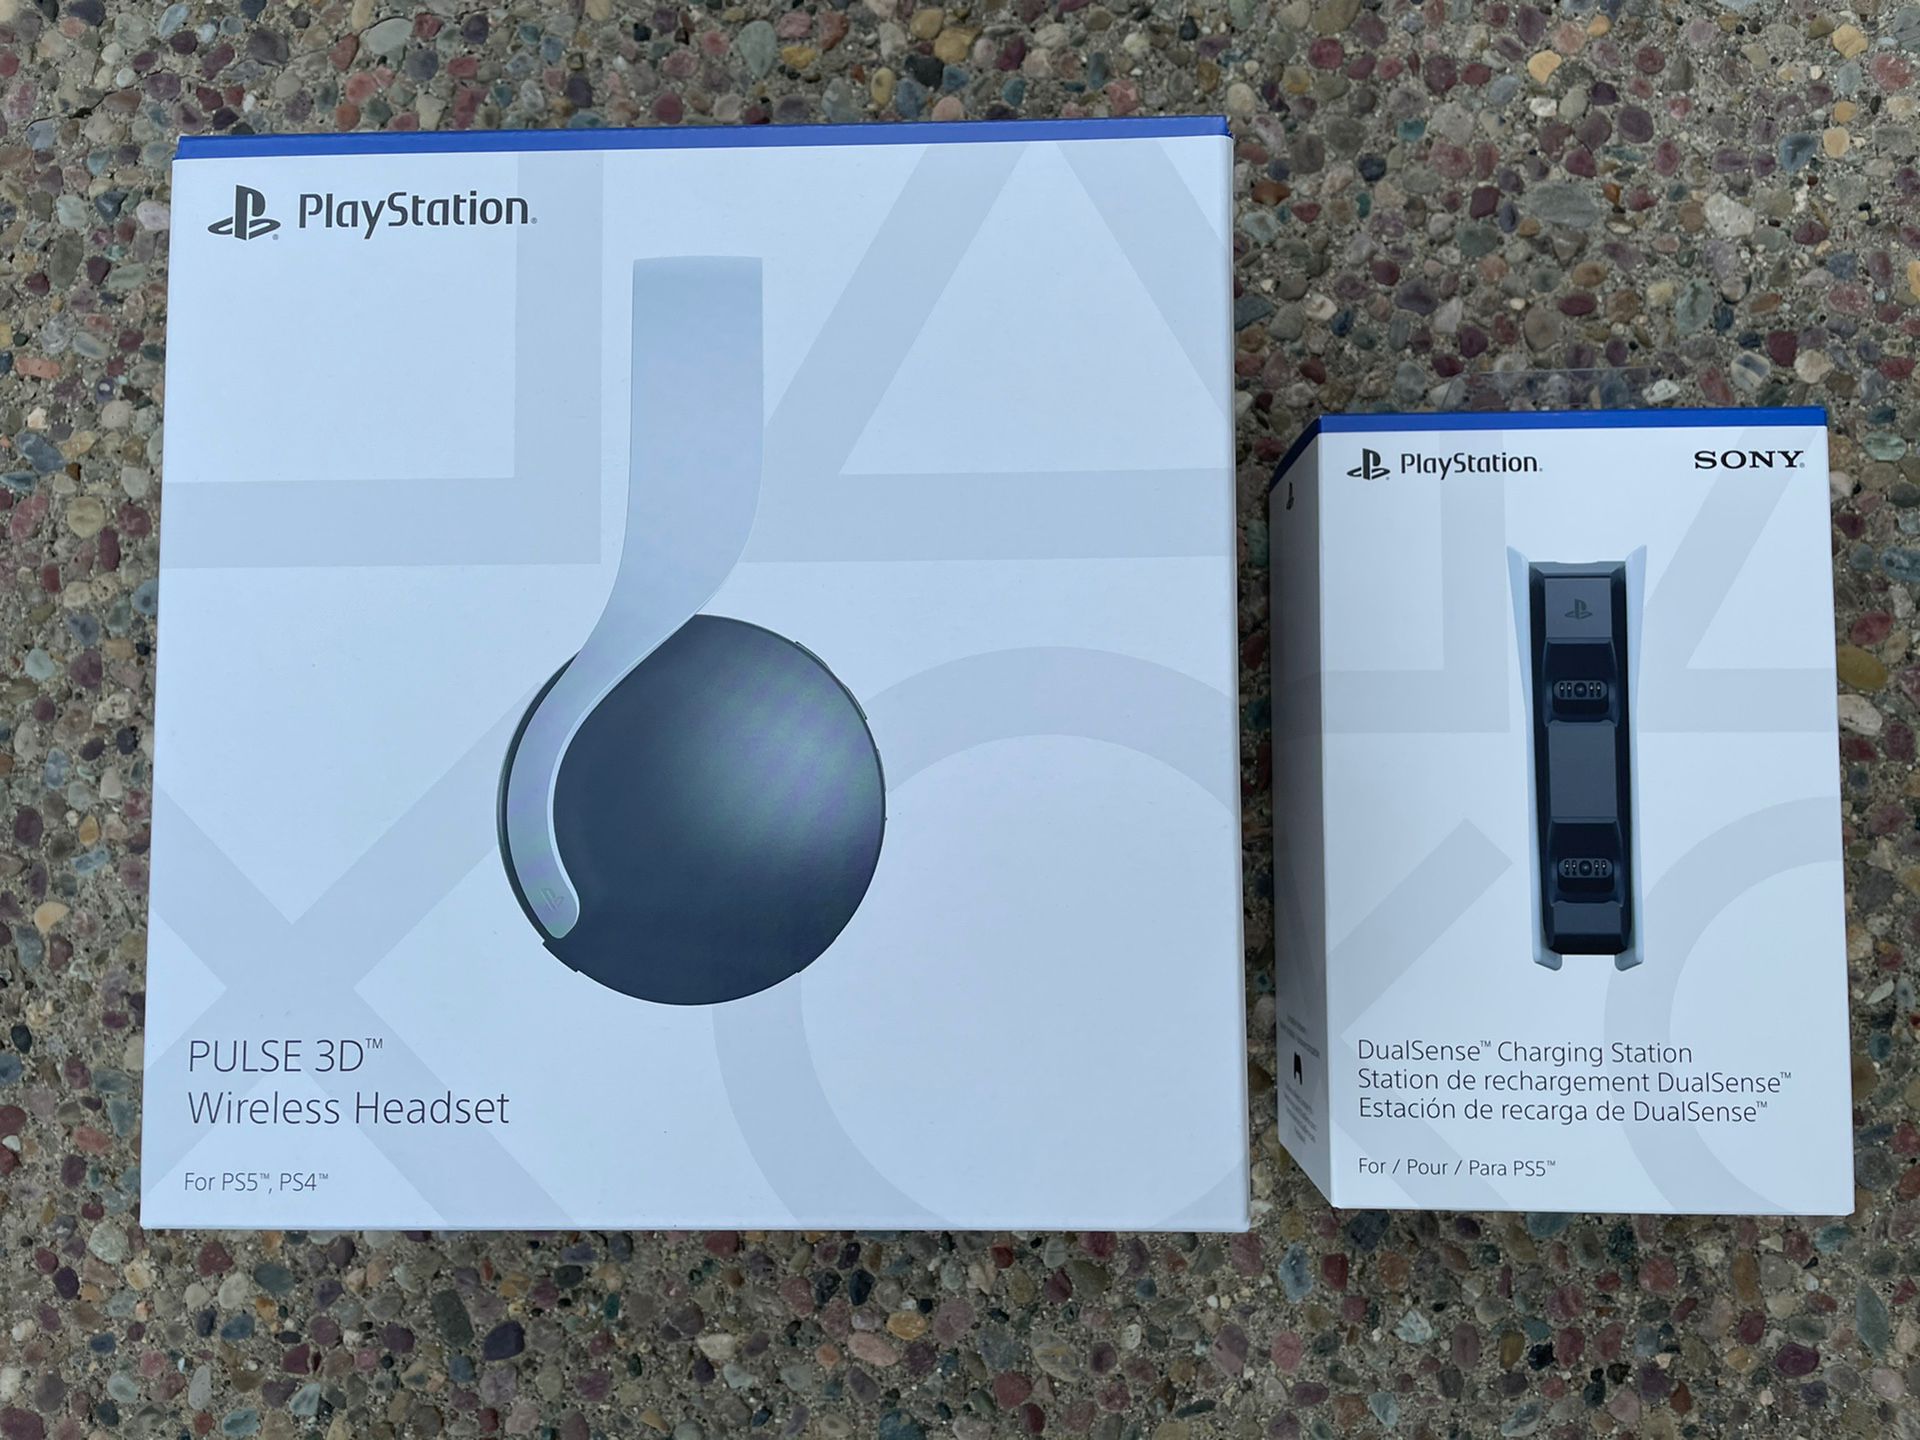 Sony Pulse 3D Wireless Headset AND DualSense Charging Station HD